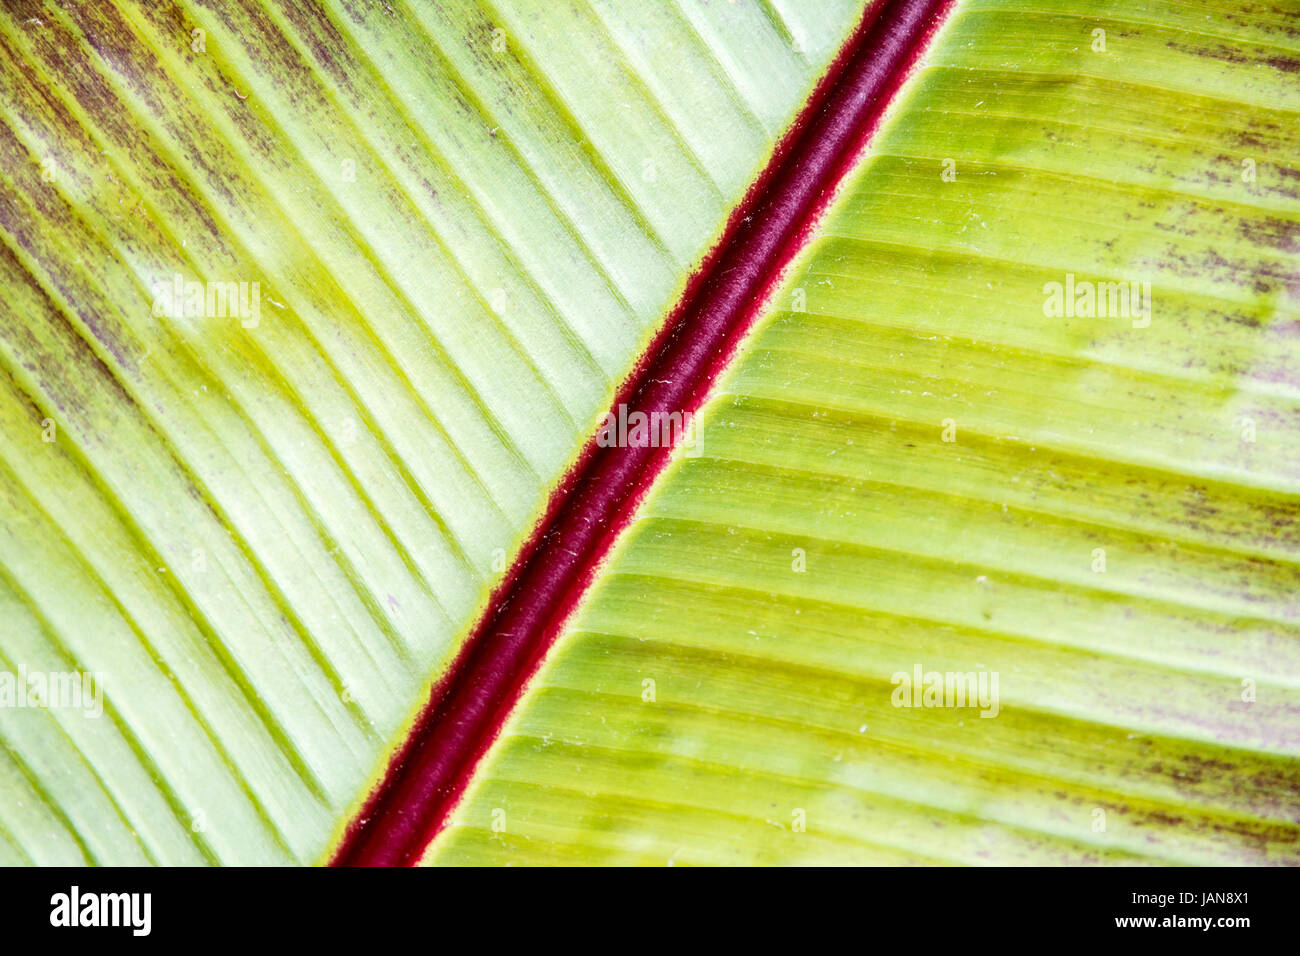 Aabstract organic texture background of a green leaf Stock Photo